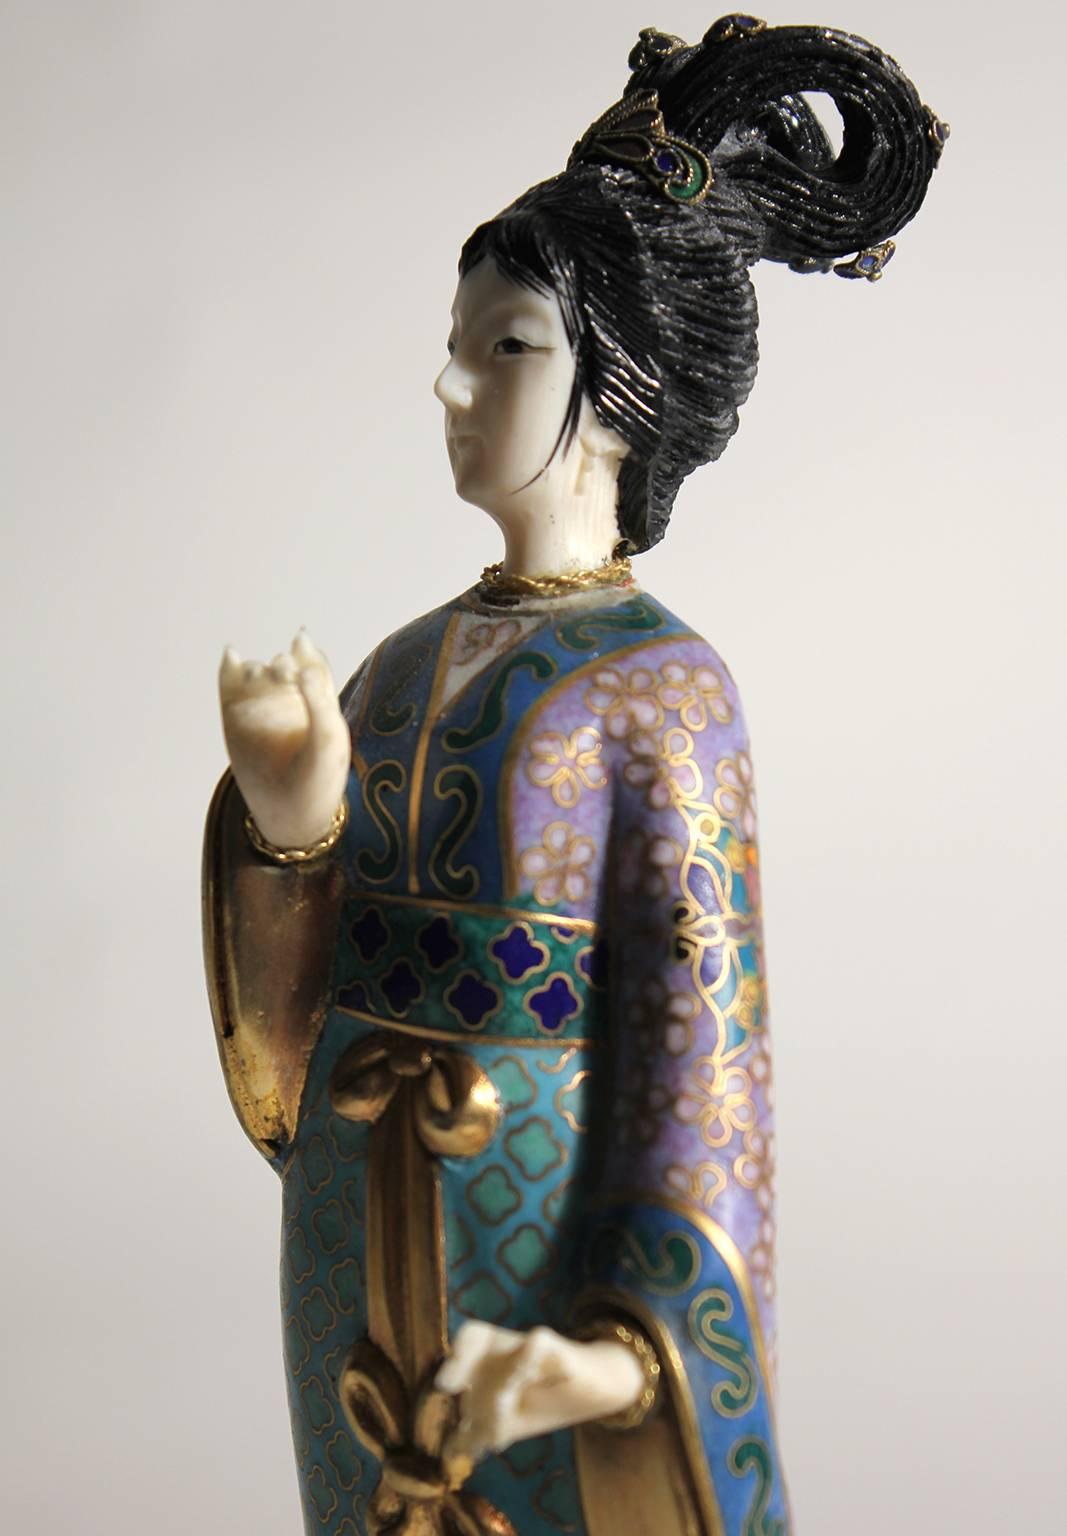 Early 20th Century Antique Chinese Cloisonne Enameled Carved Guanyin Quan Yin Sculpture Figurine